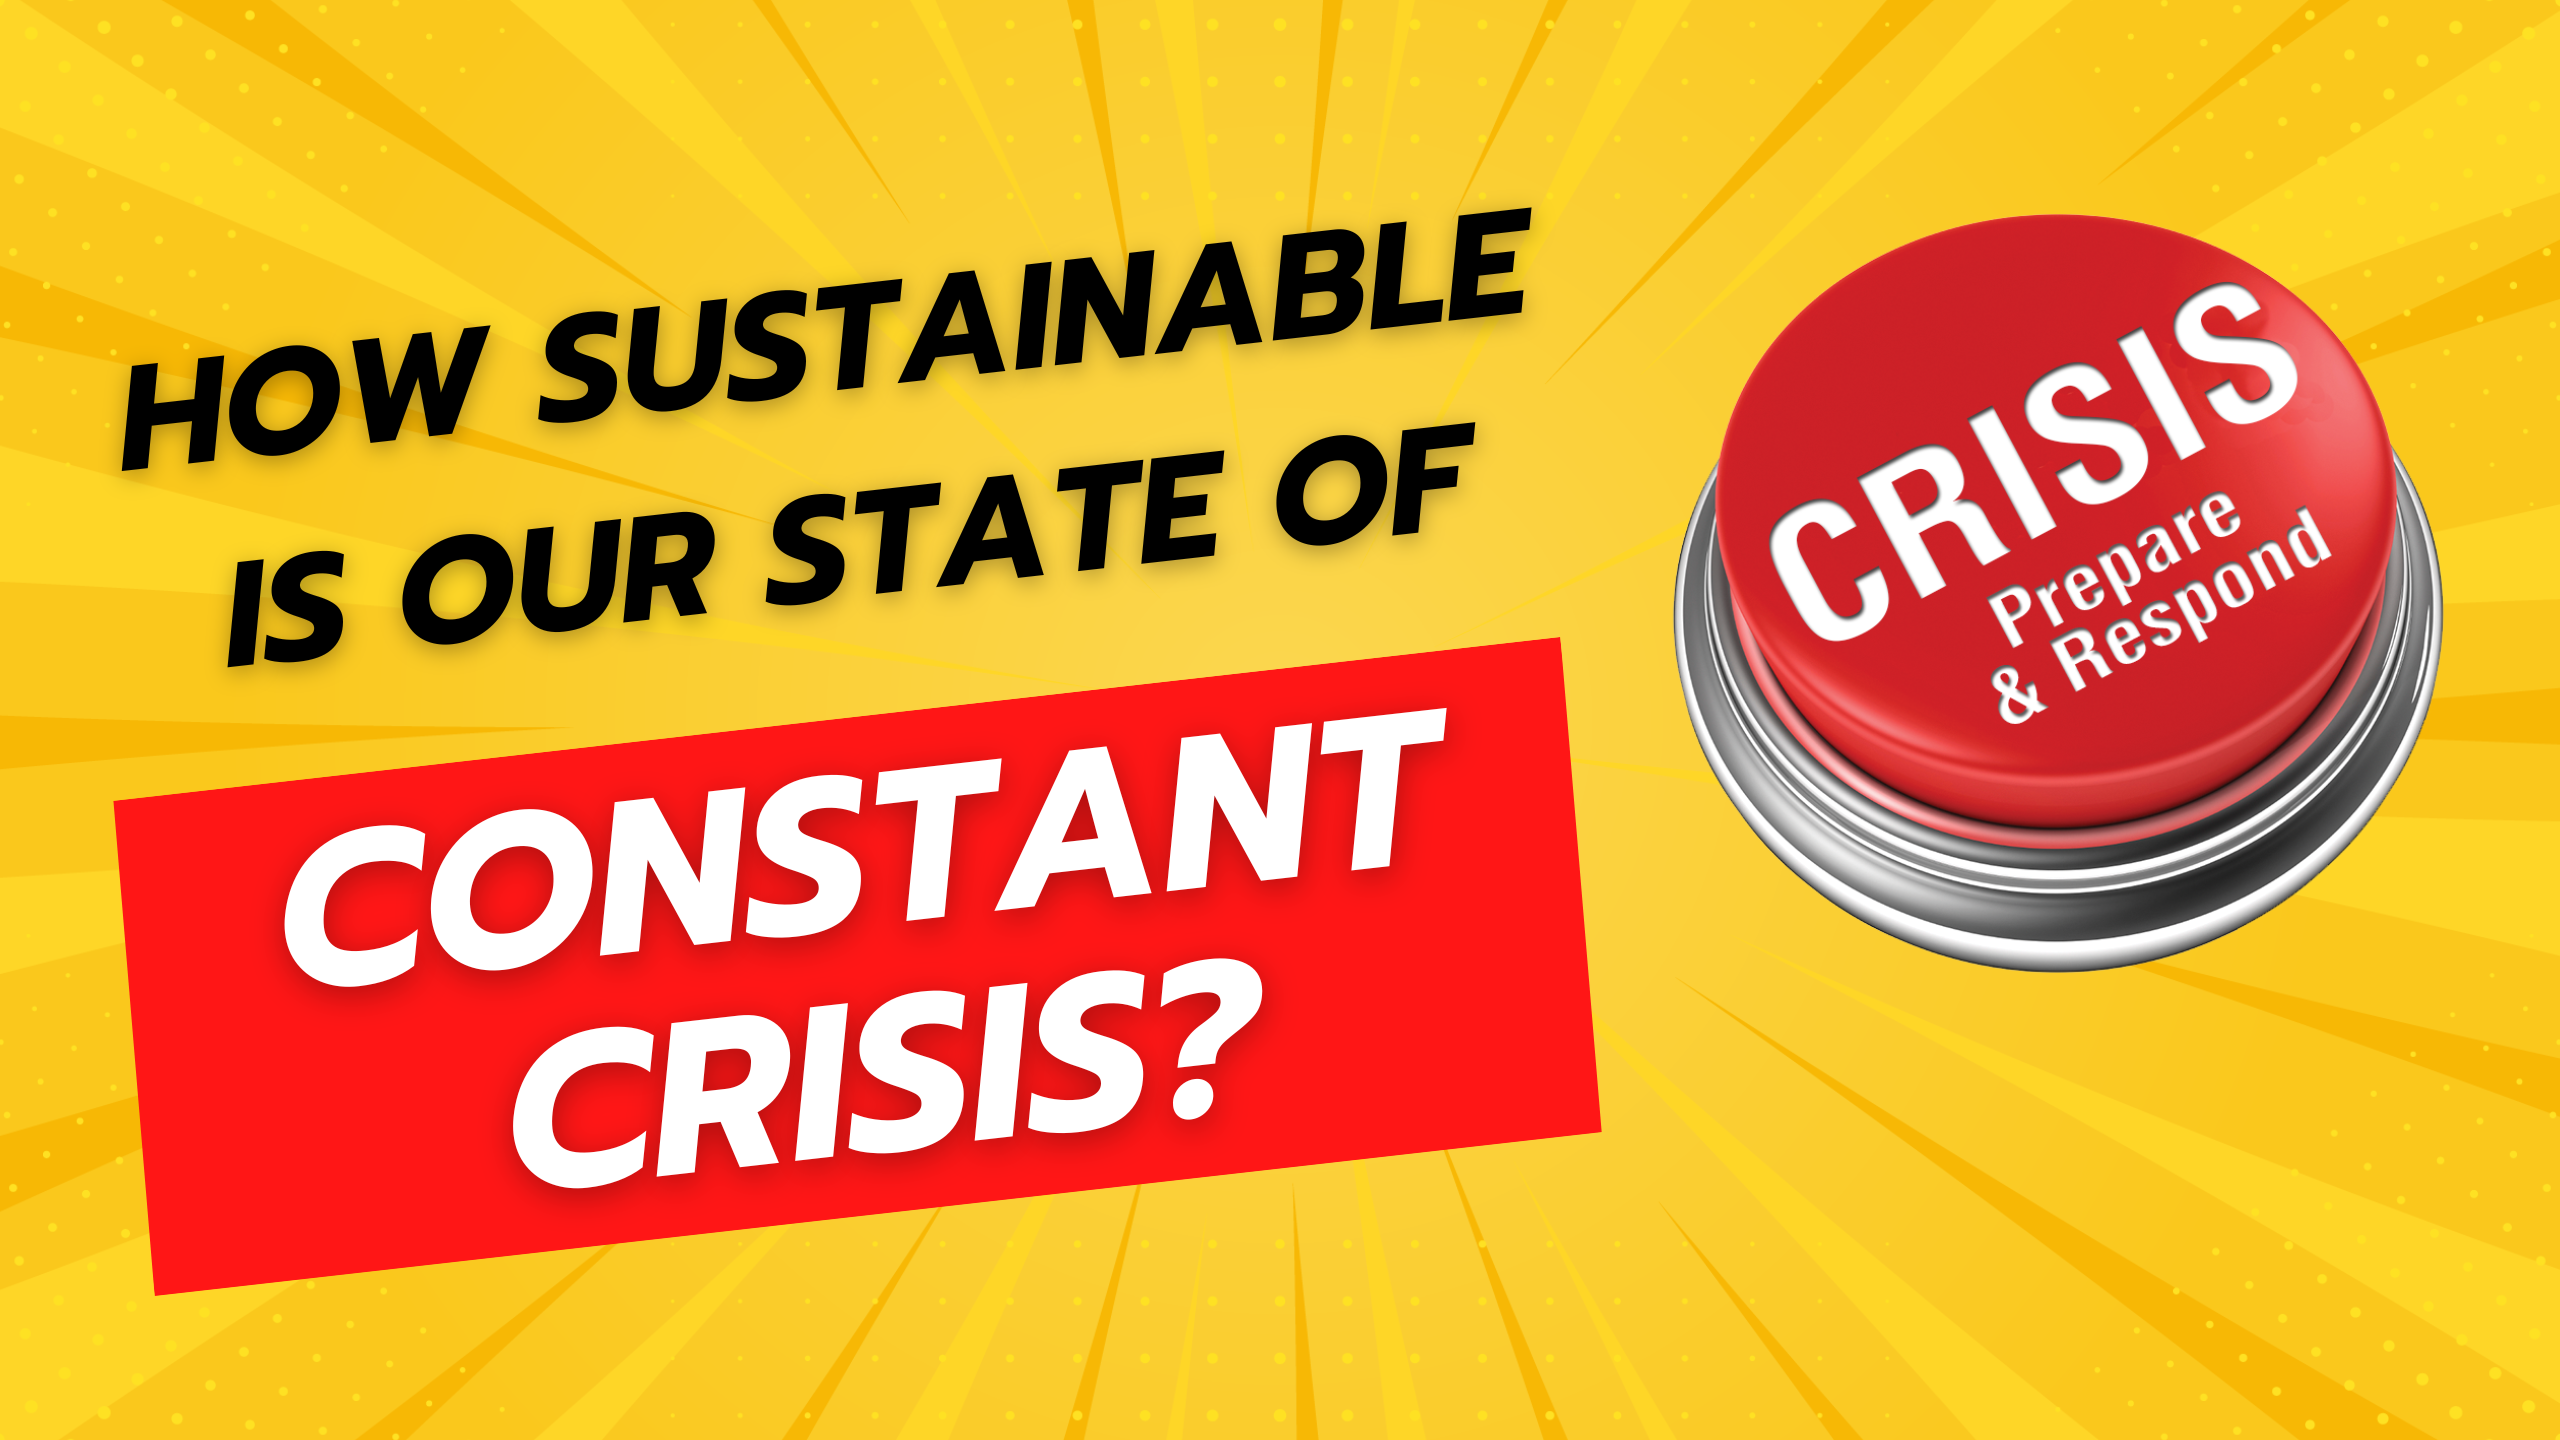 Edelman Crisis Comms Report Illustrates Pressures PR Teams Face in the Age of Outrage – But is it Sustainable?